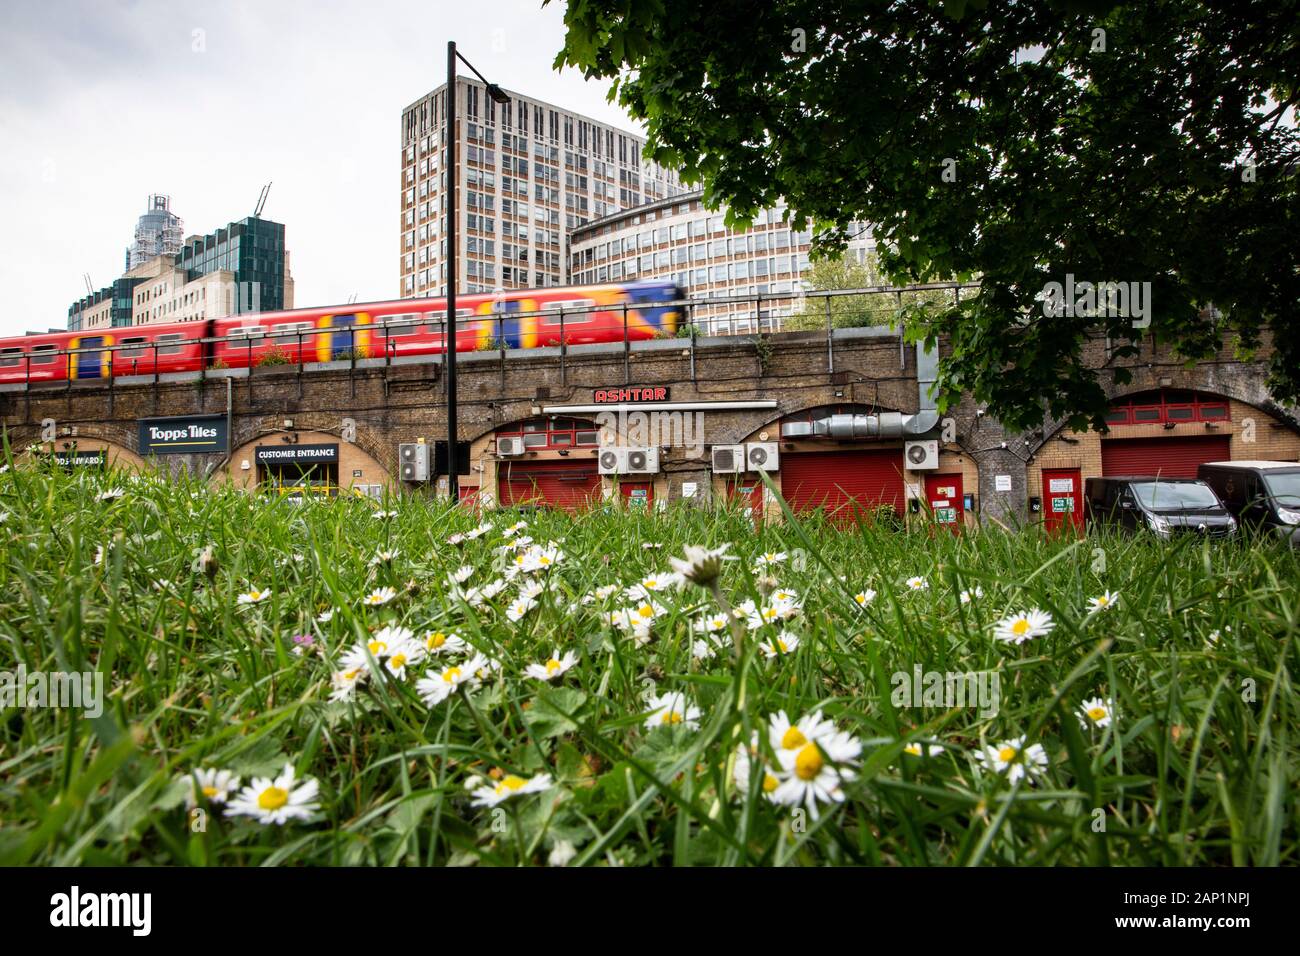 High rise buildings of the London district of Vauxhall overlook the railway's speeding trains and Vauxhall Pleasure Gardens park. Stock Photo